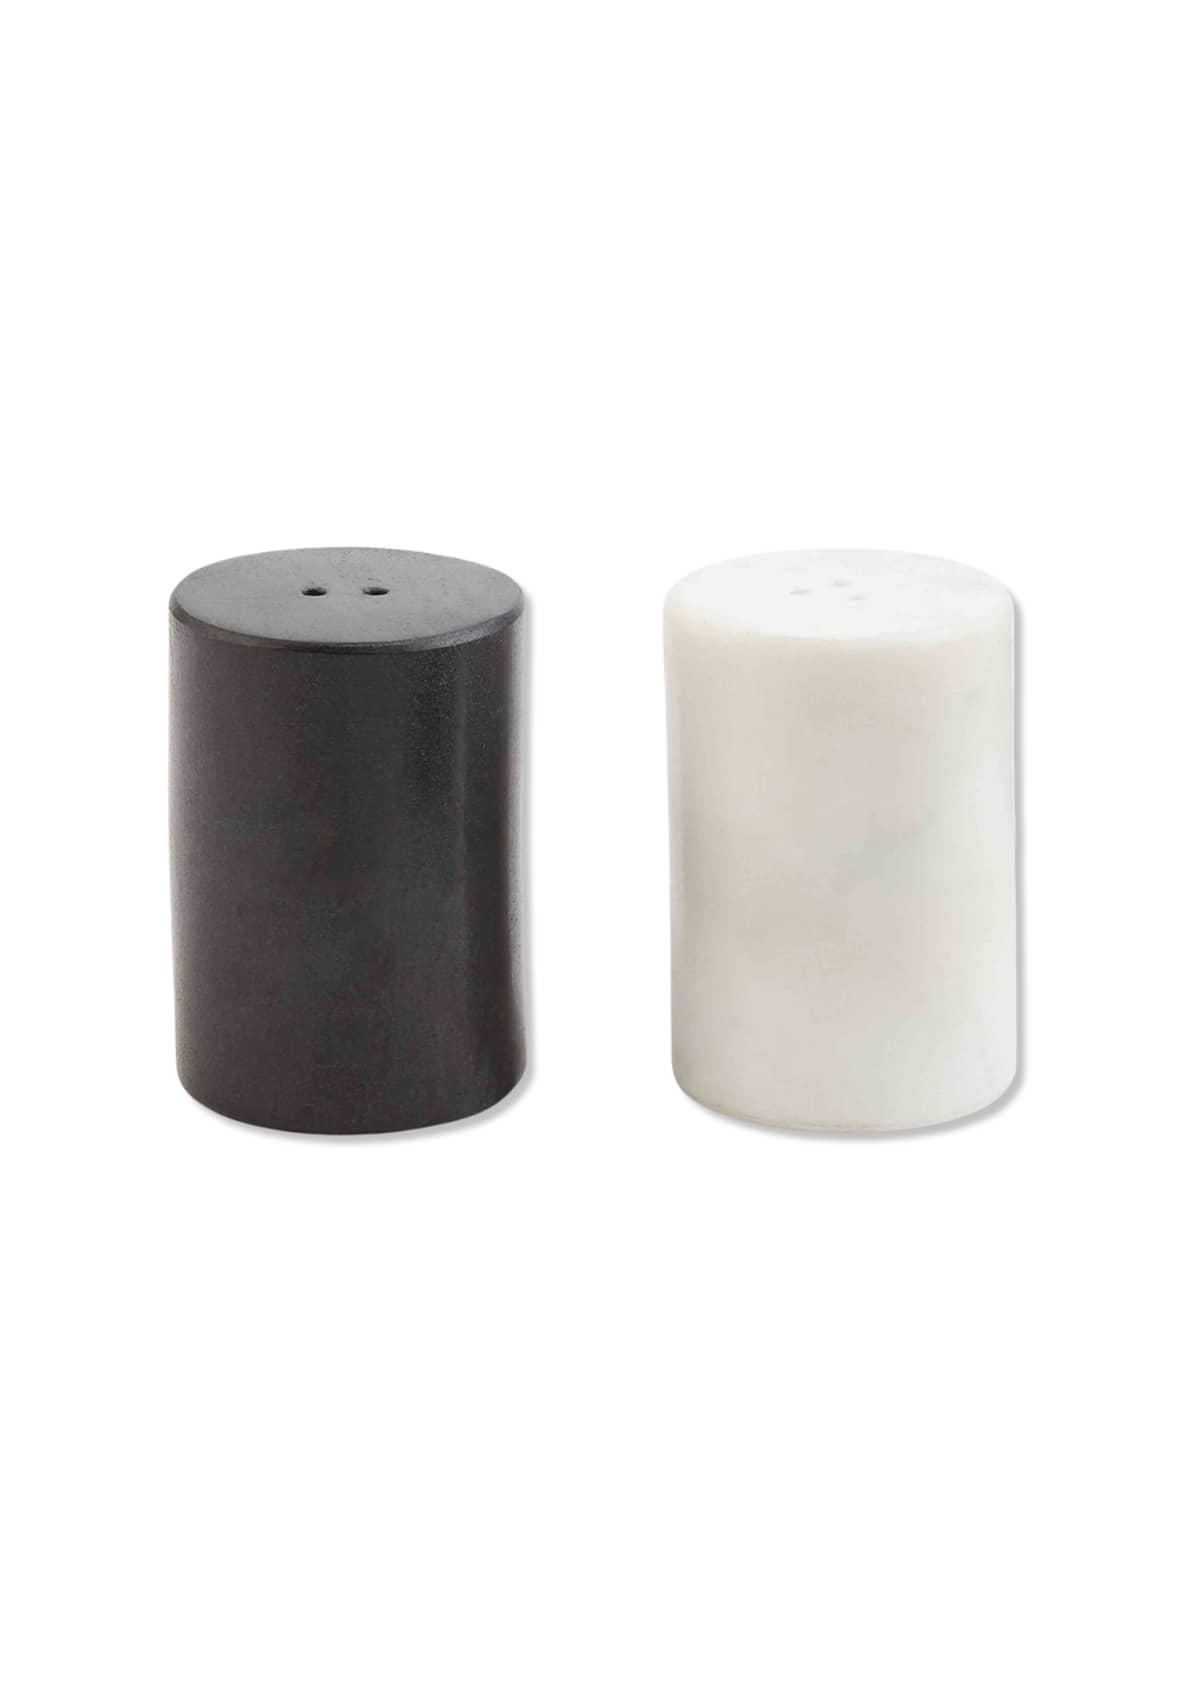 Marble Black White Salt and Pepper Shakers -Mud Pie / One Coas- Ruby Jane-